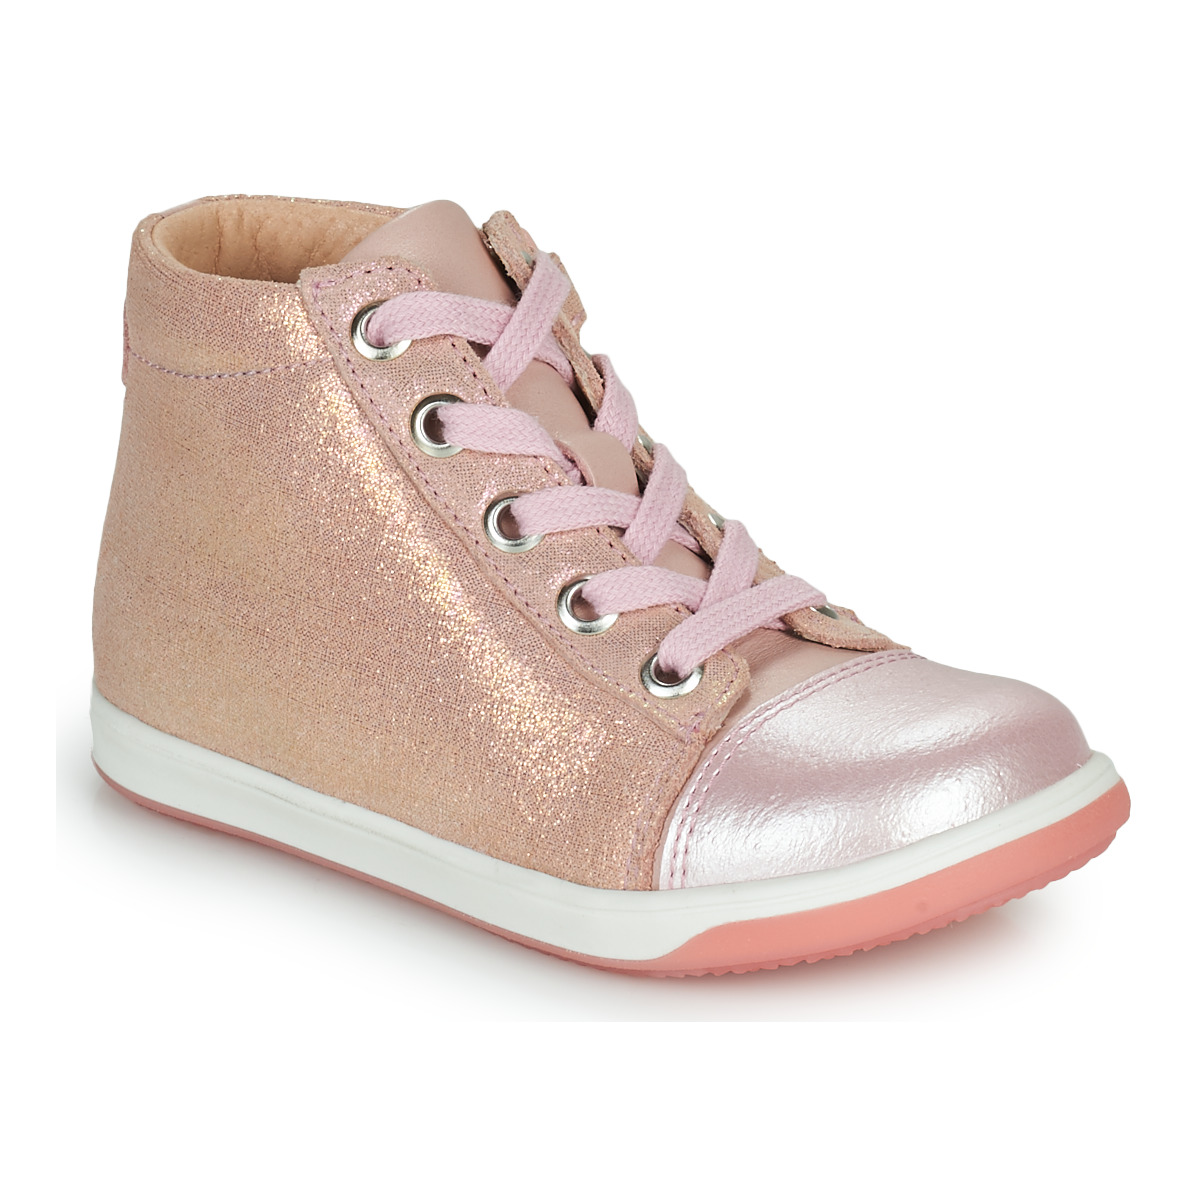 Chaussures Fille Robes, Manteaux, Vestes VITAMINE Rose